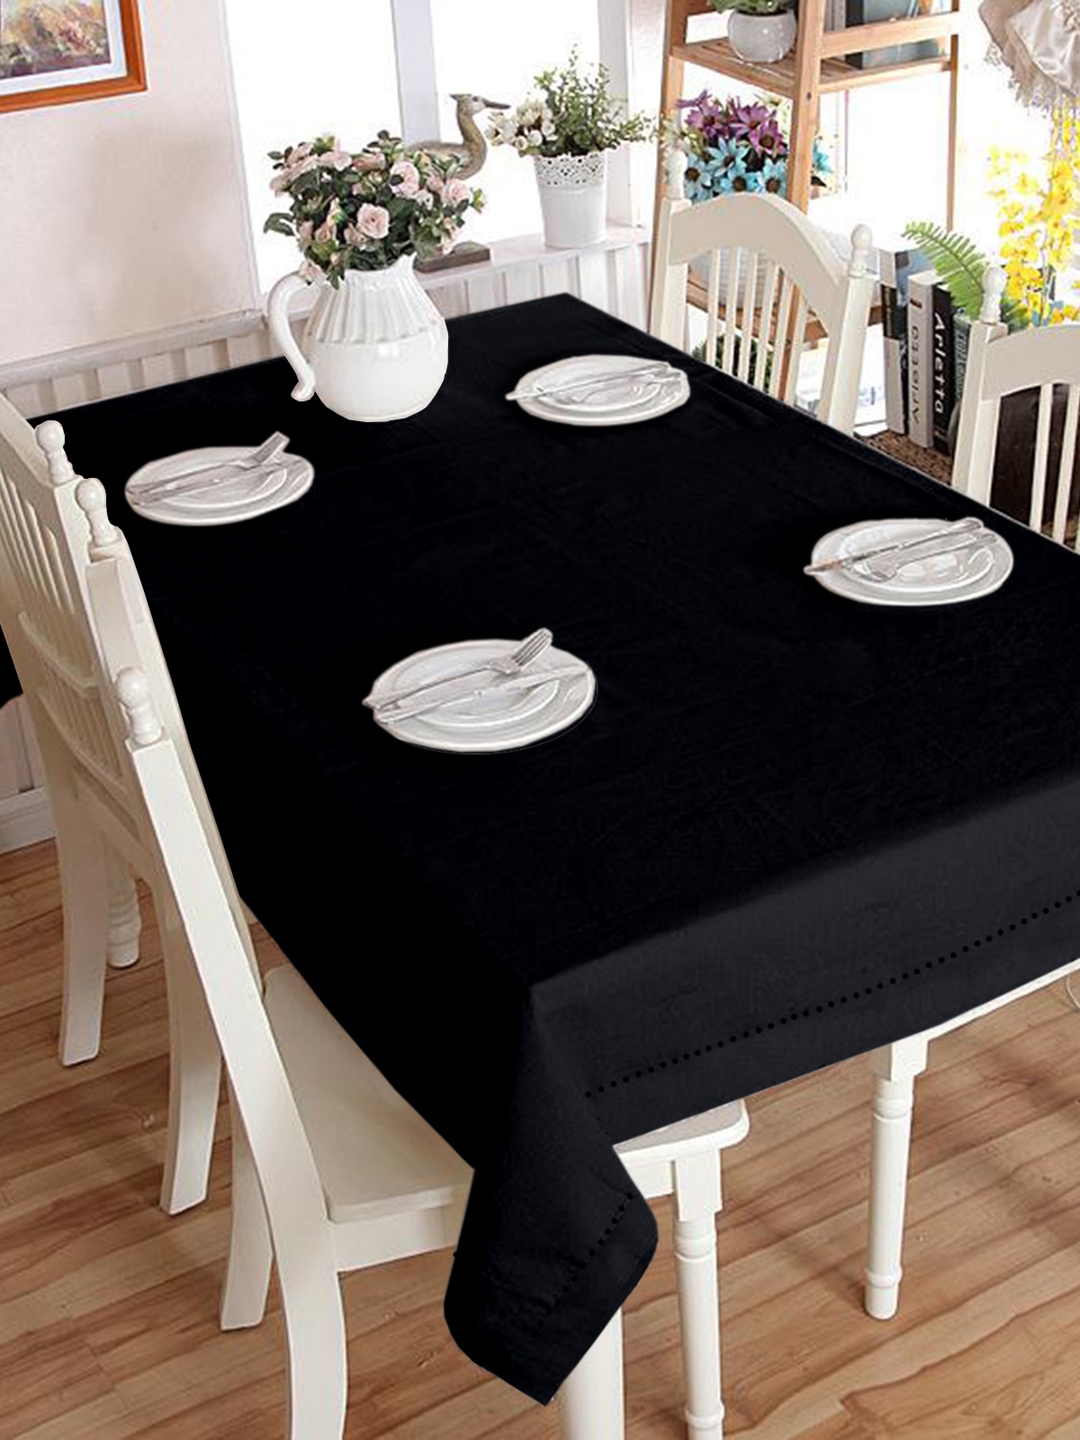 Lushomes Black Solid Cotton 4 Seater Square Table Cover